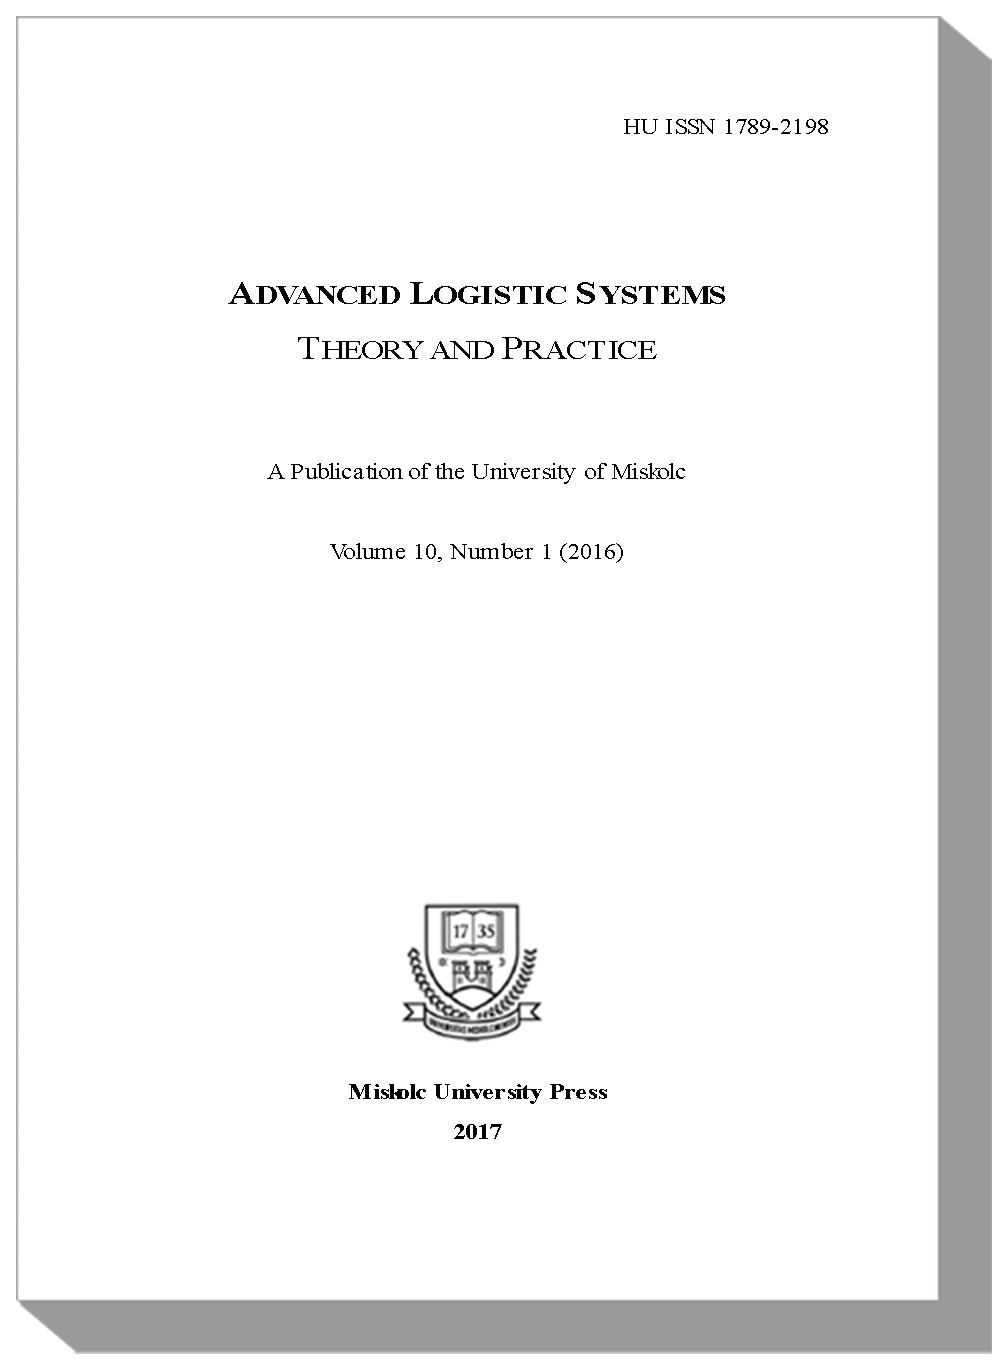 					View Vol. 10 No. 1 (2016): Advanced Logistic Systems - Theory and Practice
				